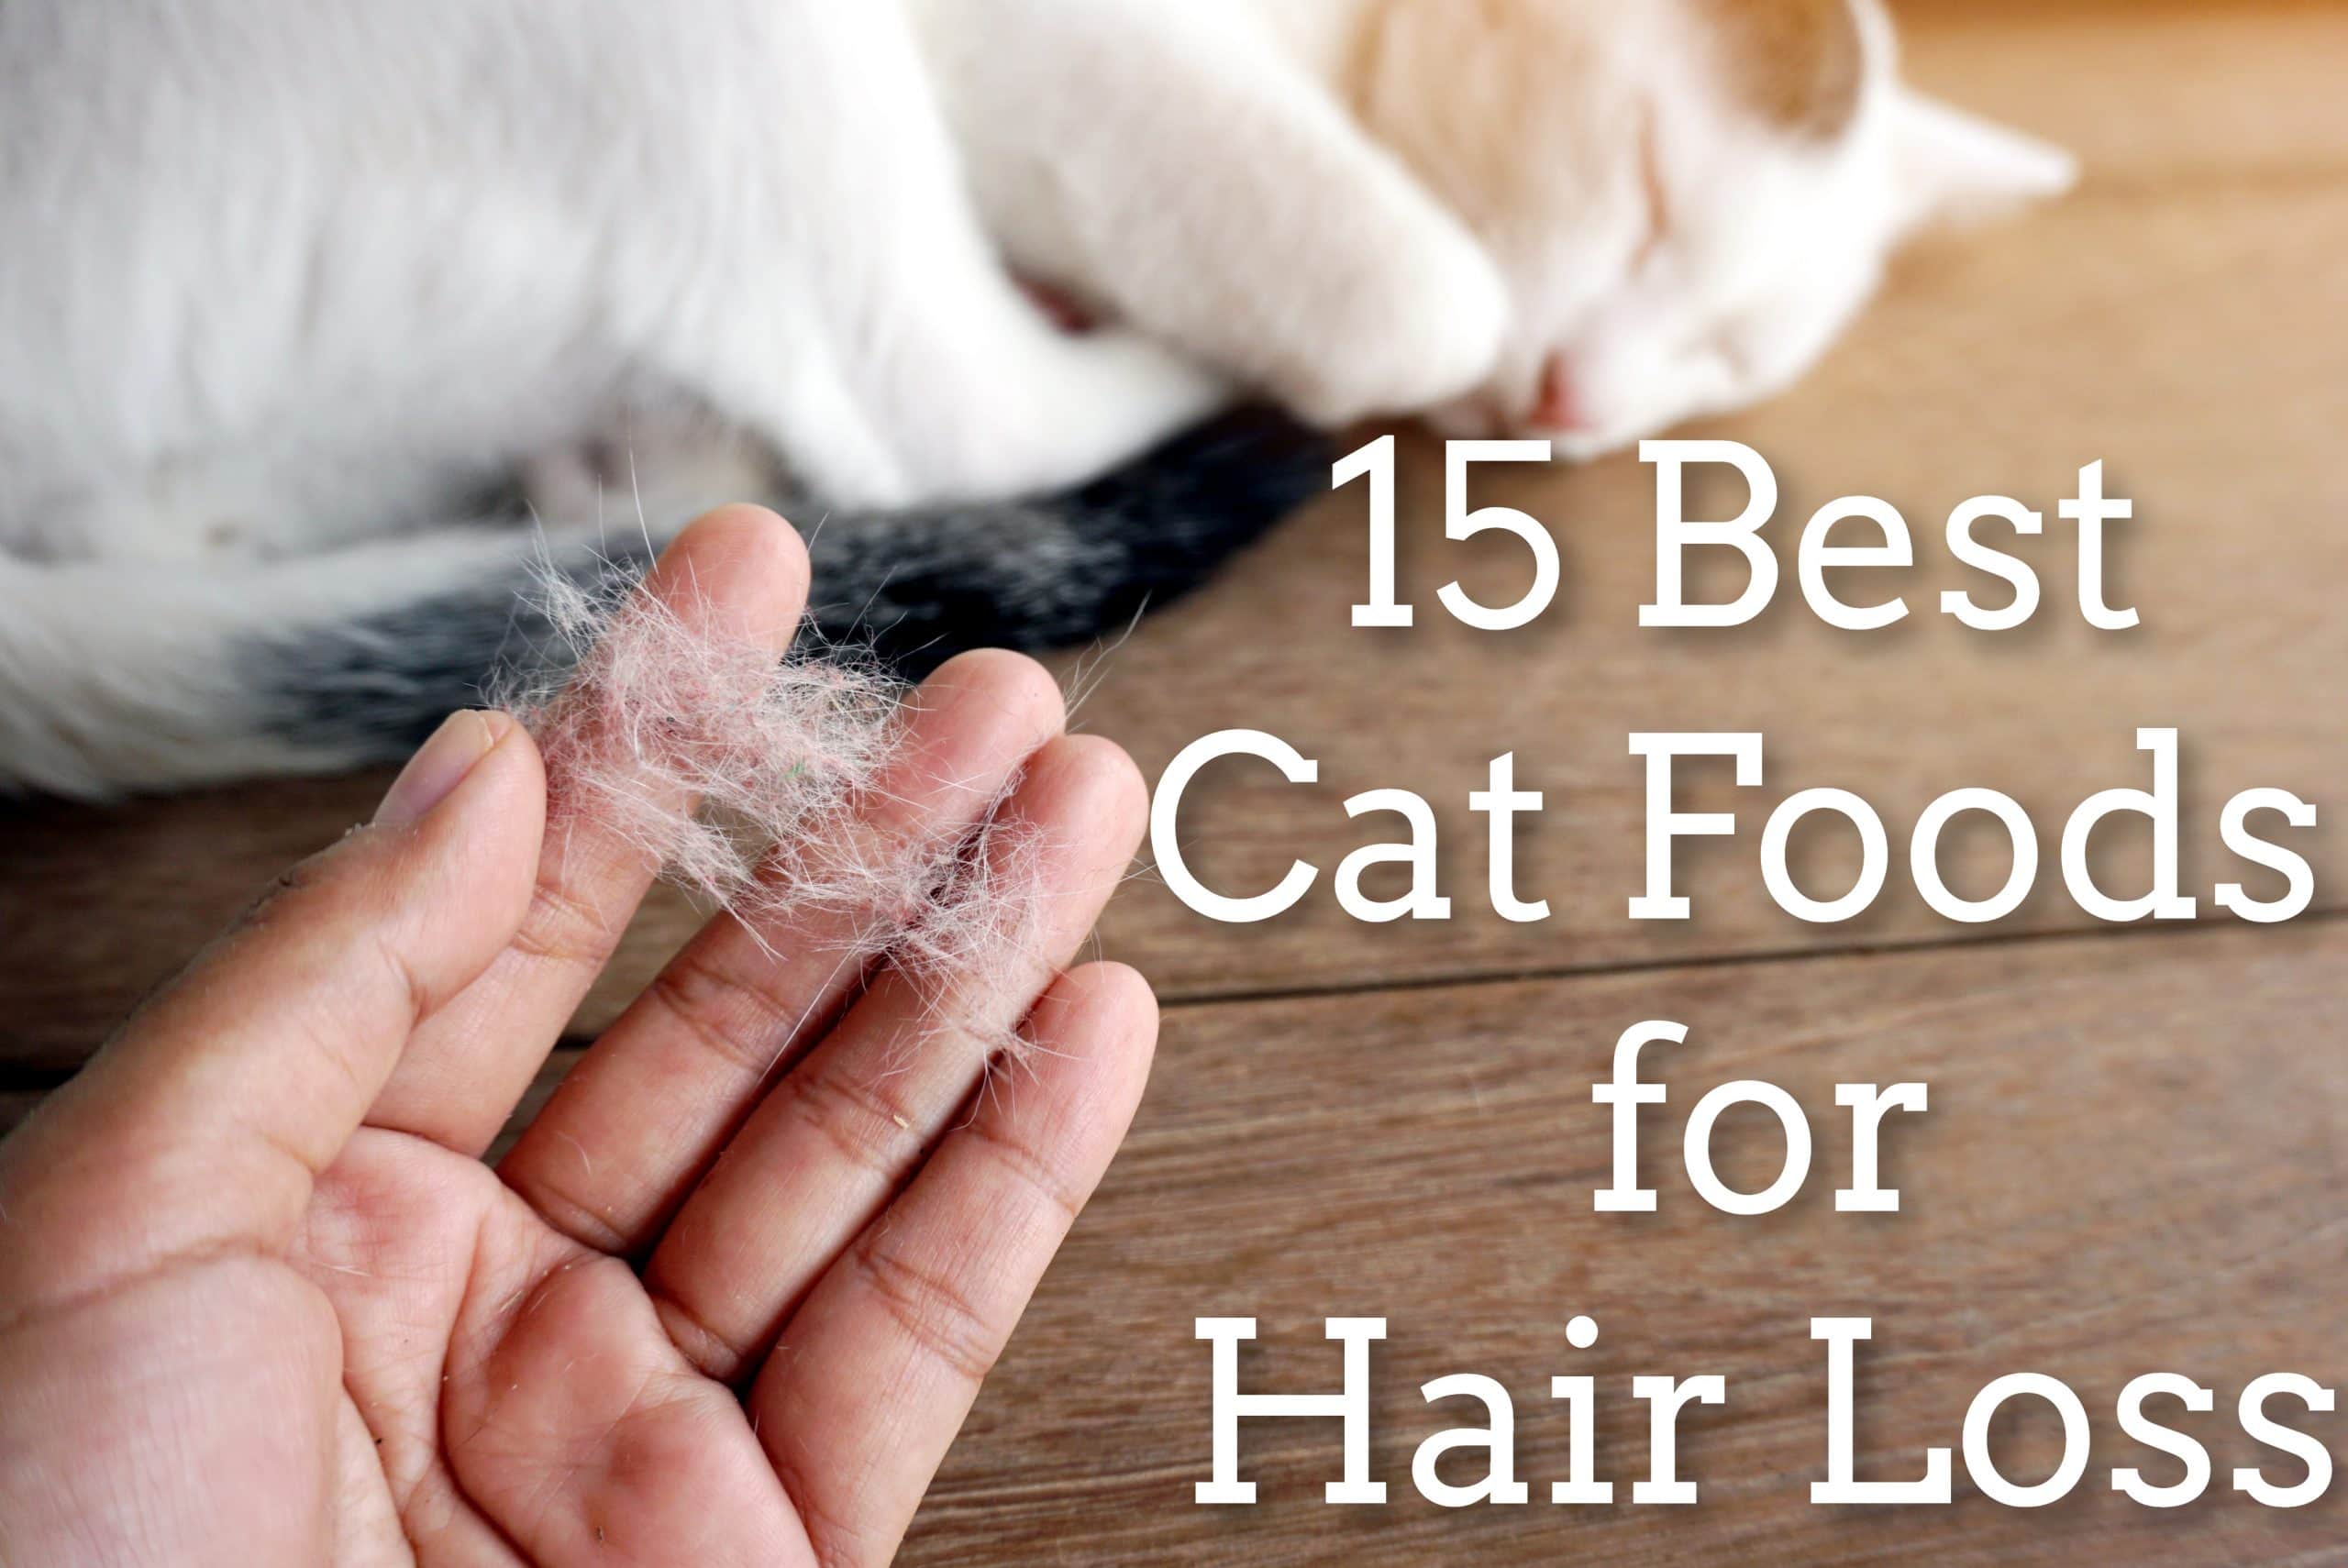 15 Best Cat Foods for Hair Loss